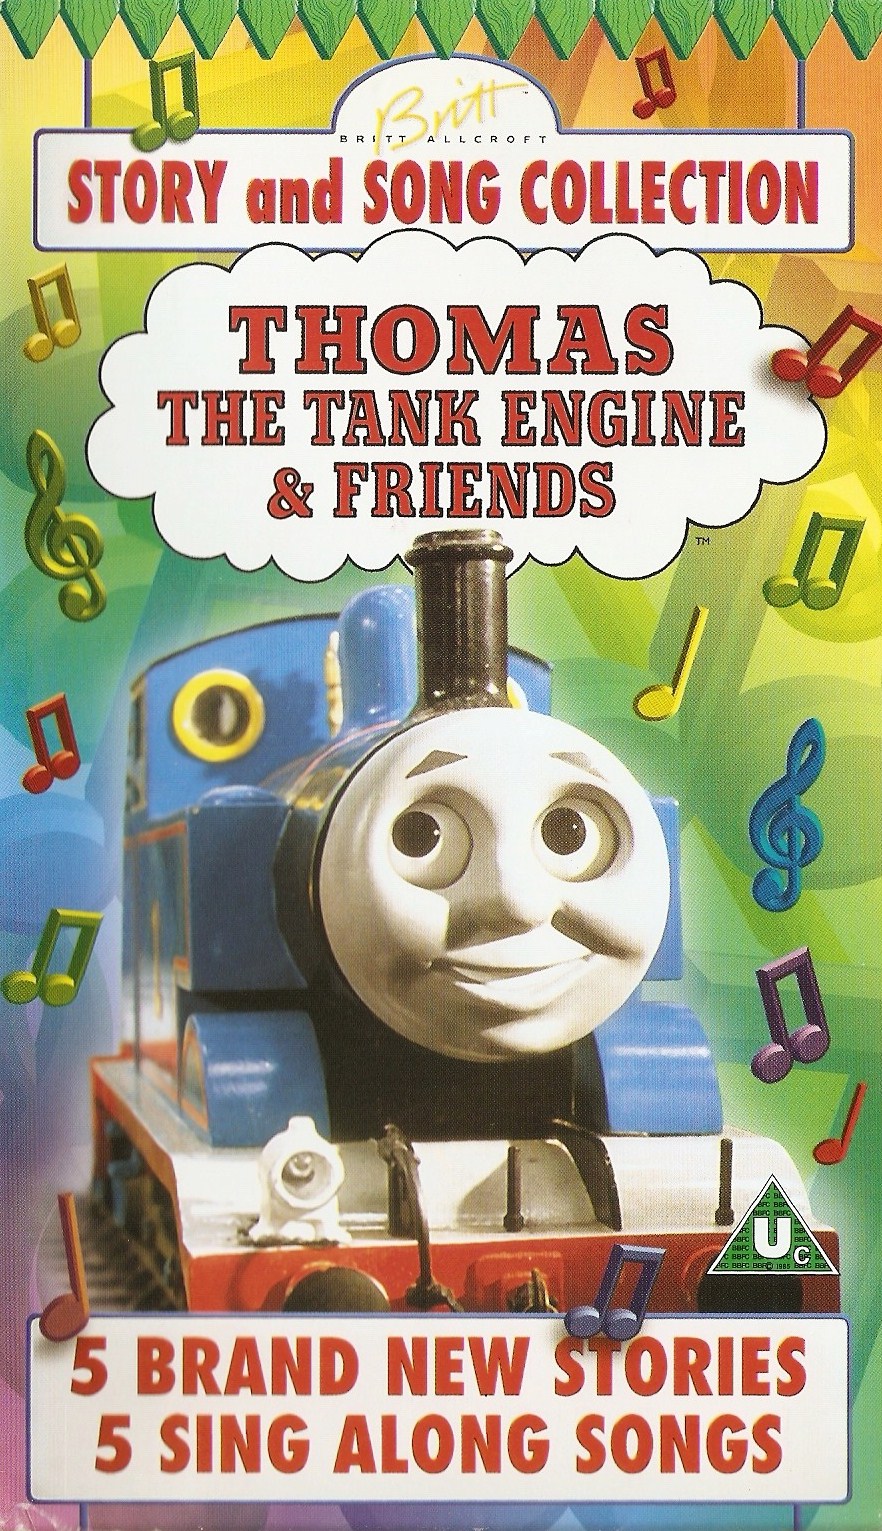 Story and Song Collection | Thomas the Tank Engine Wikia | FANDOM